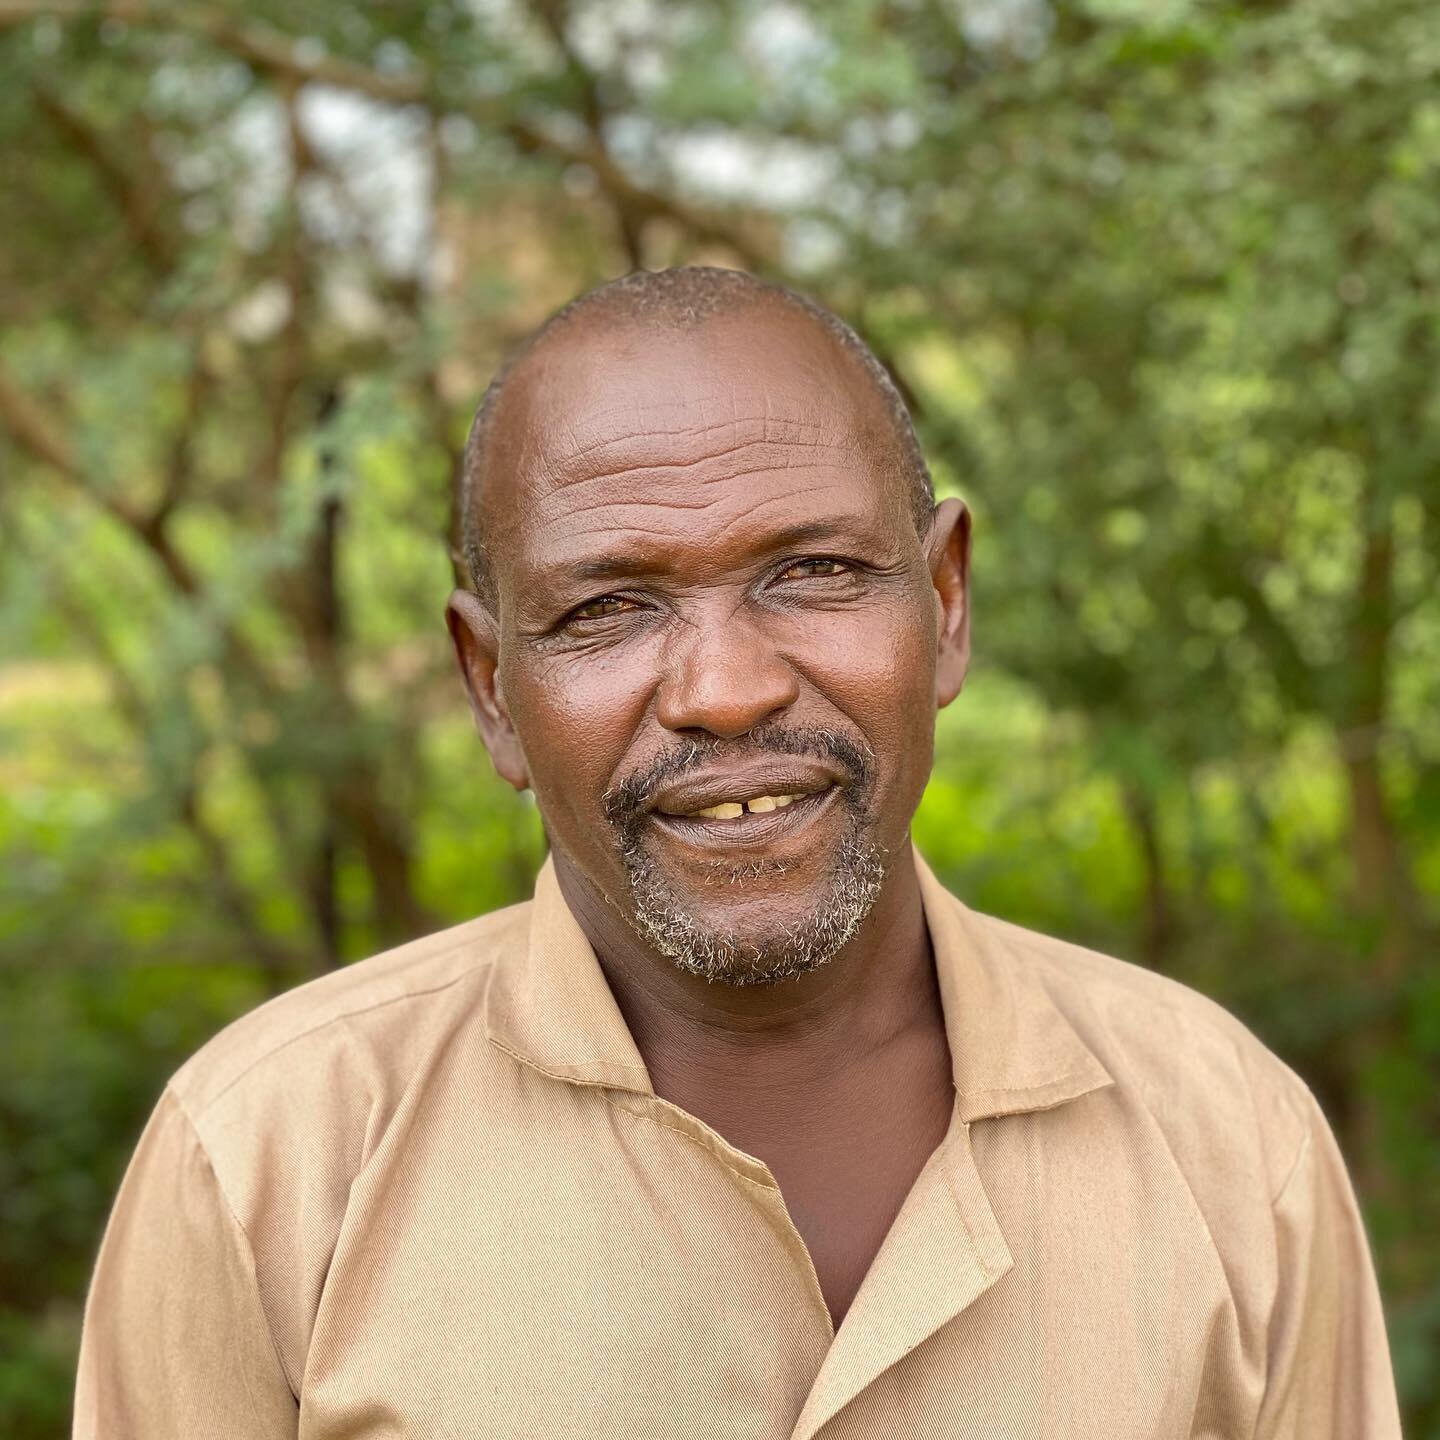 &ldquo;My mom was a leprosy patient here. She came here to look for treatment and I followed my mother here....The first time I came here I was not a Christian. I was a Muslim. After, I received teaching about Jesus. I received preaching about the wo